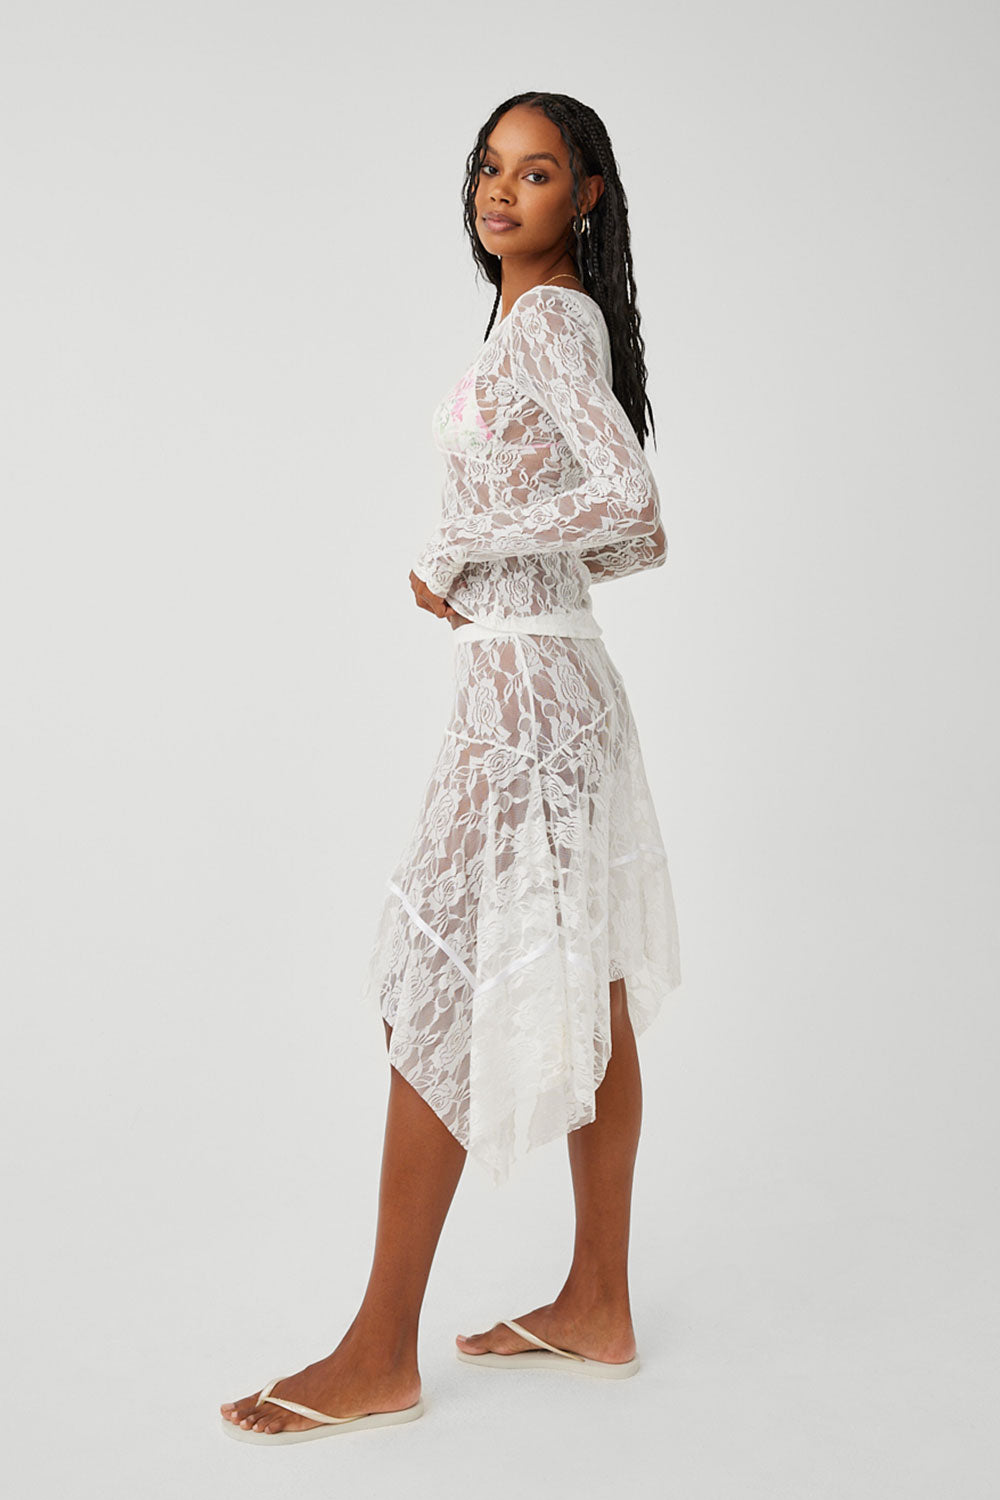 Day Lace Long Sleeve Shirt - White